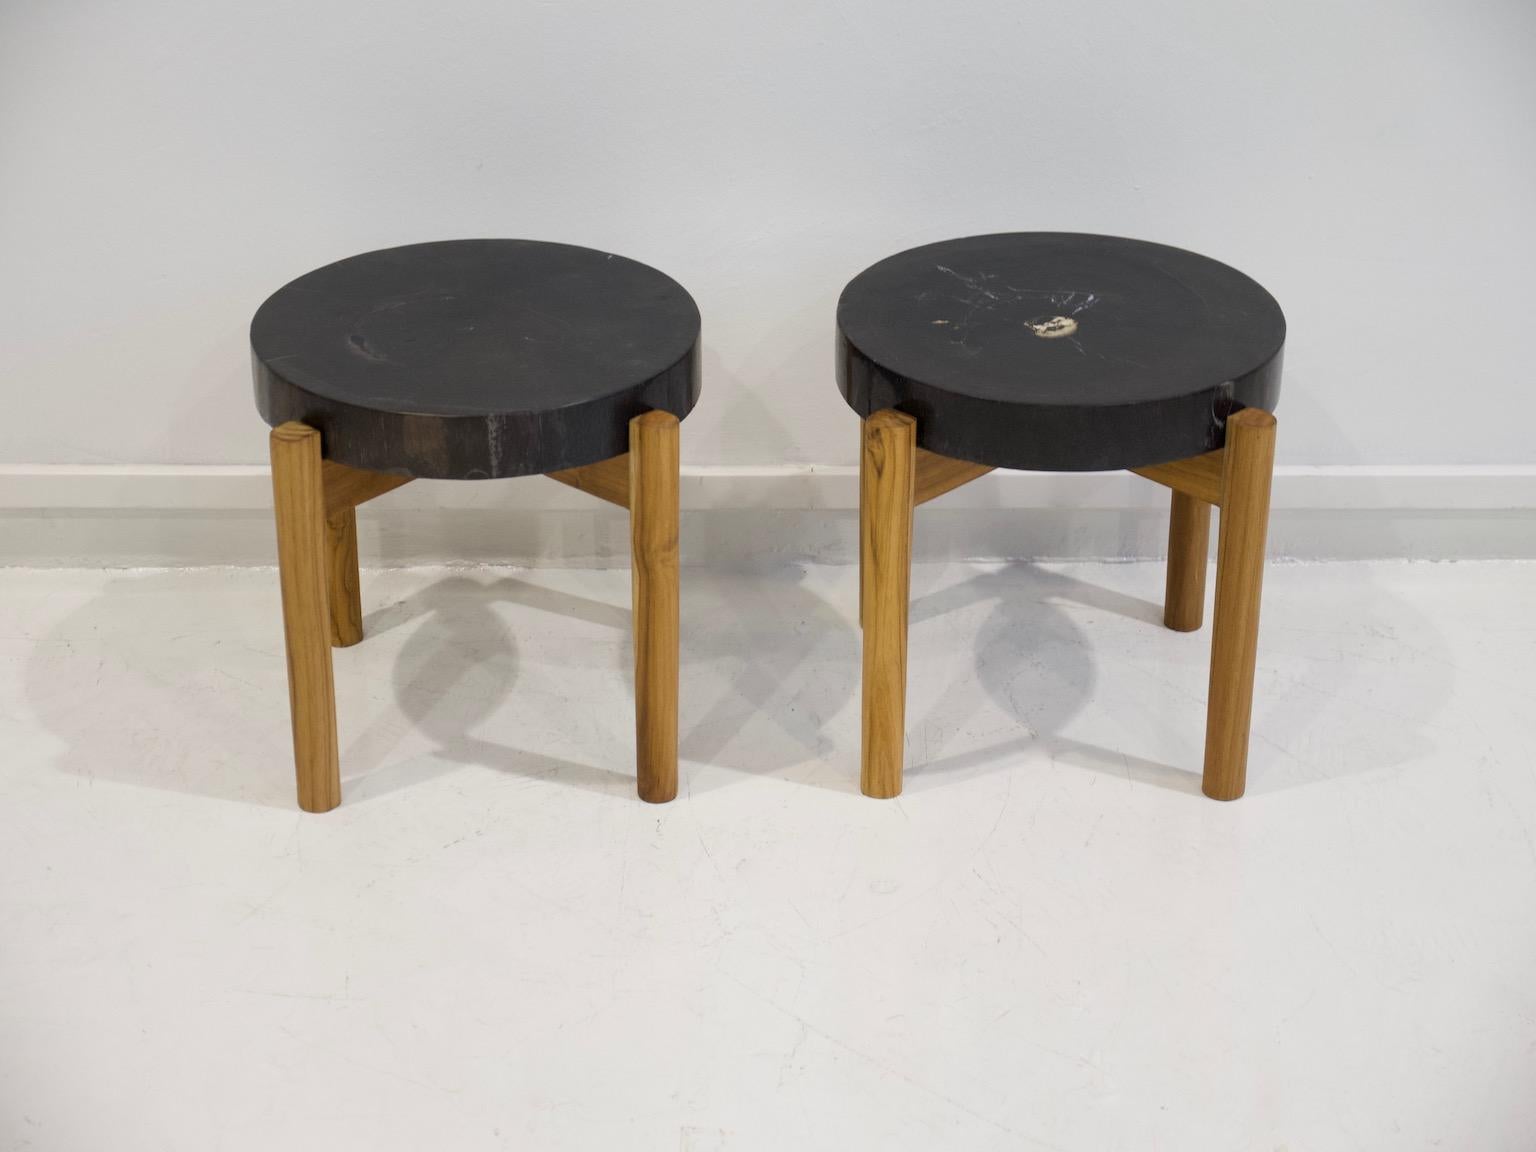 Two round side or end tables with dark petrified wood top. Feet made of light color wood. Measurements of each: height 41 cm, diameter 40 cm.